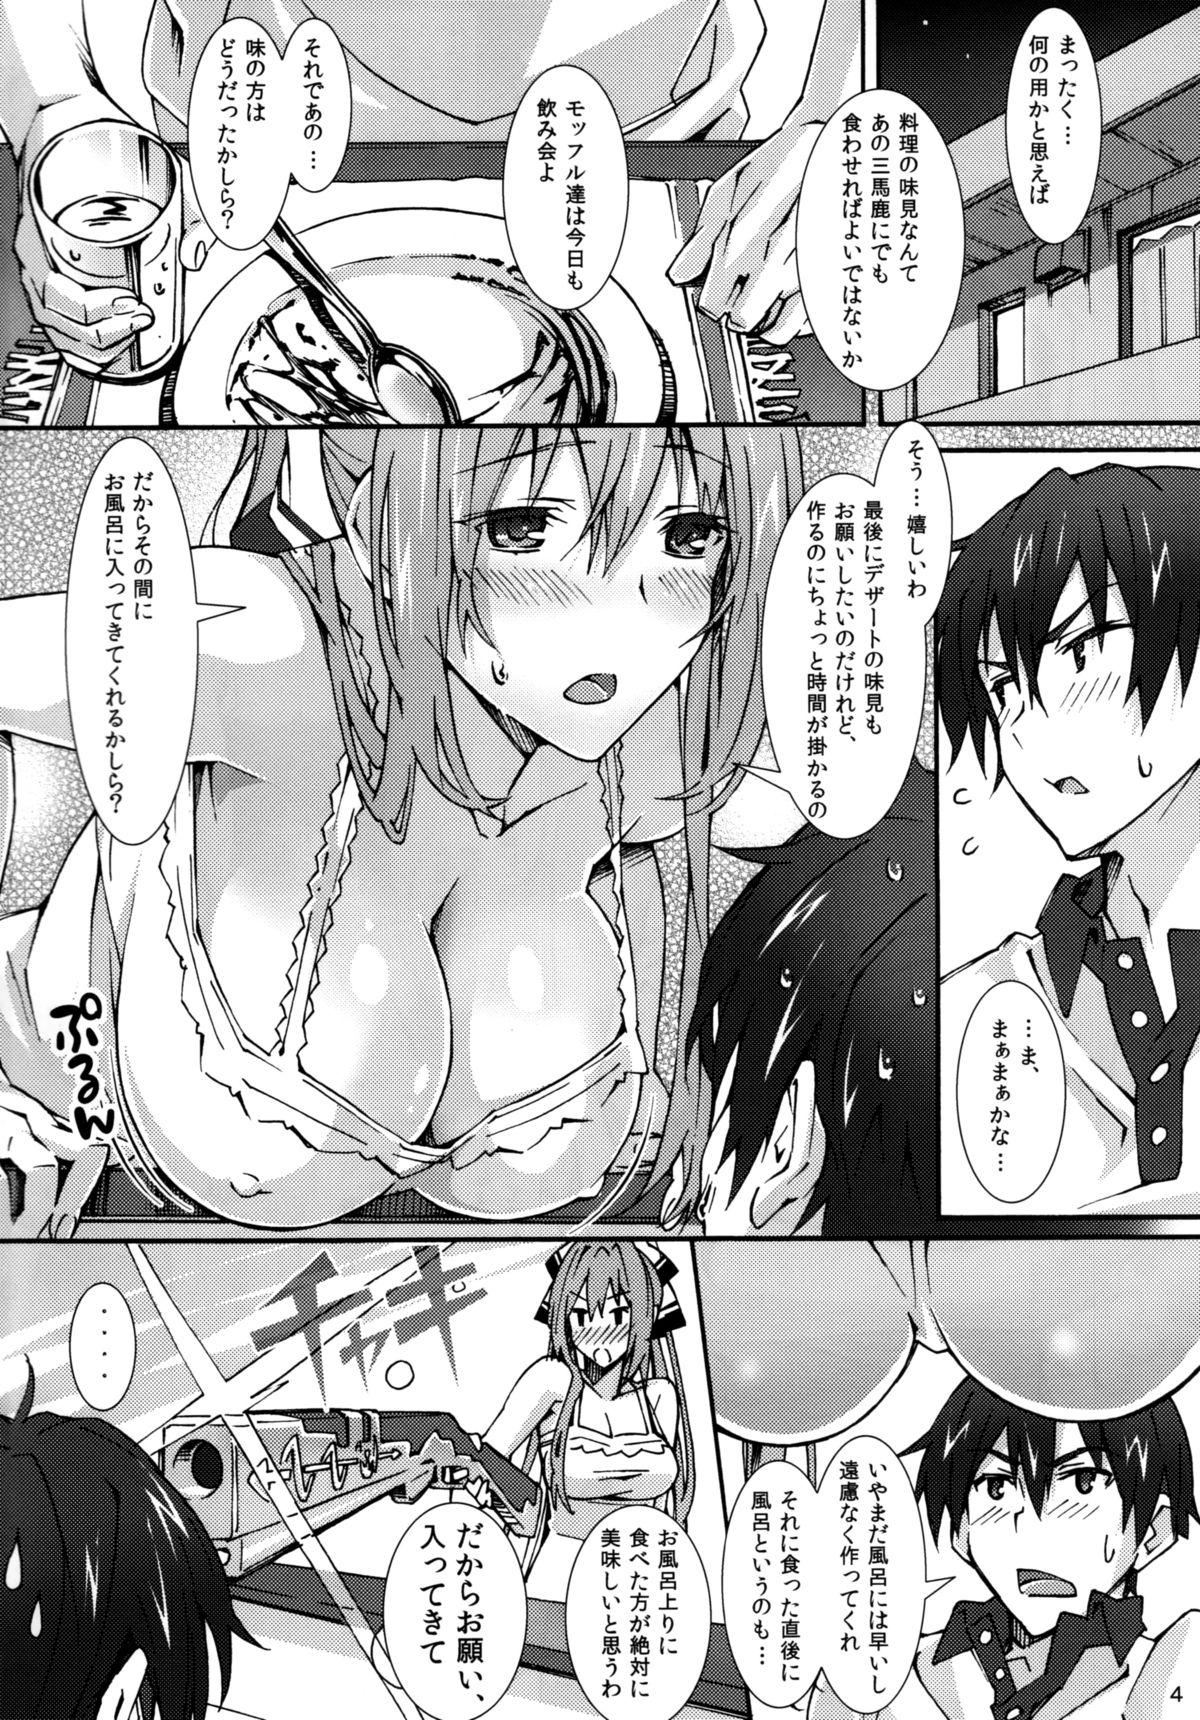 Deflowered Real Intention - Amagi brilliant park Gayclips - Page 4